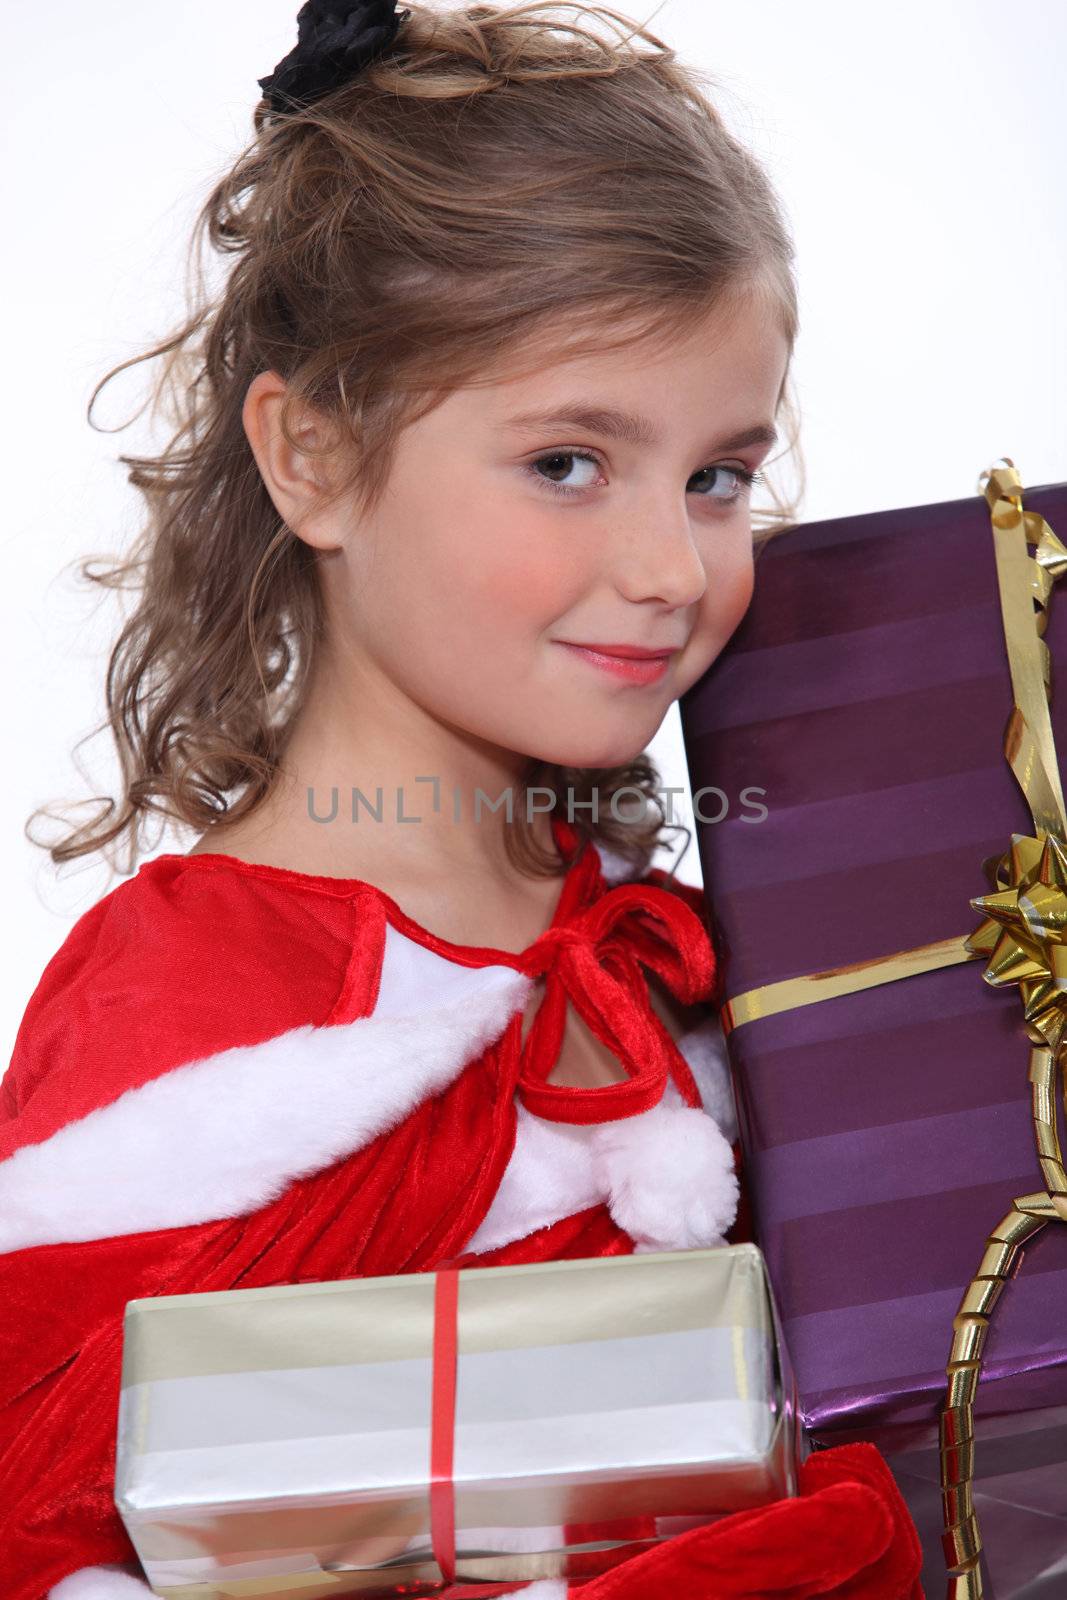 Pretty girl holding her Christmas presents by phovoir